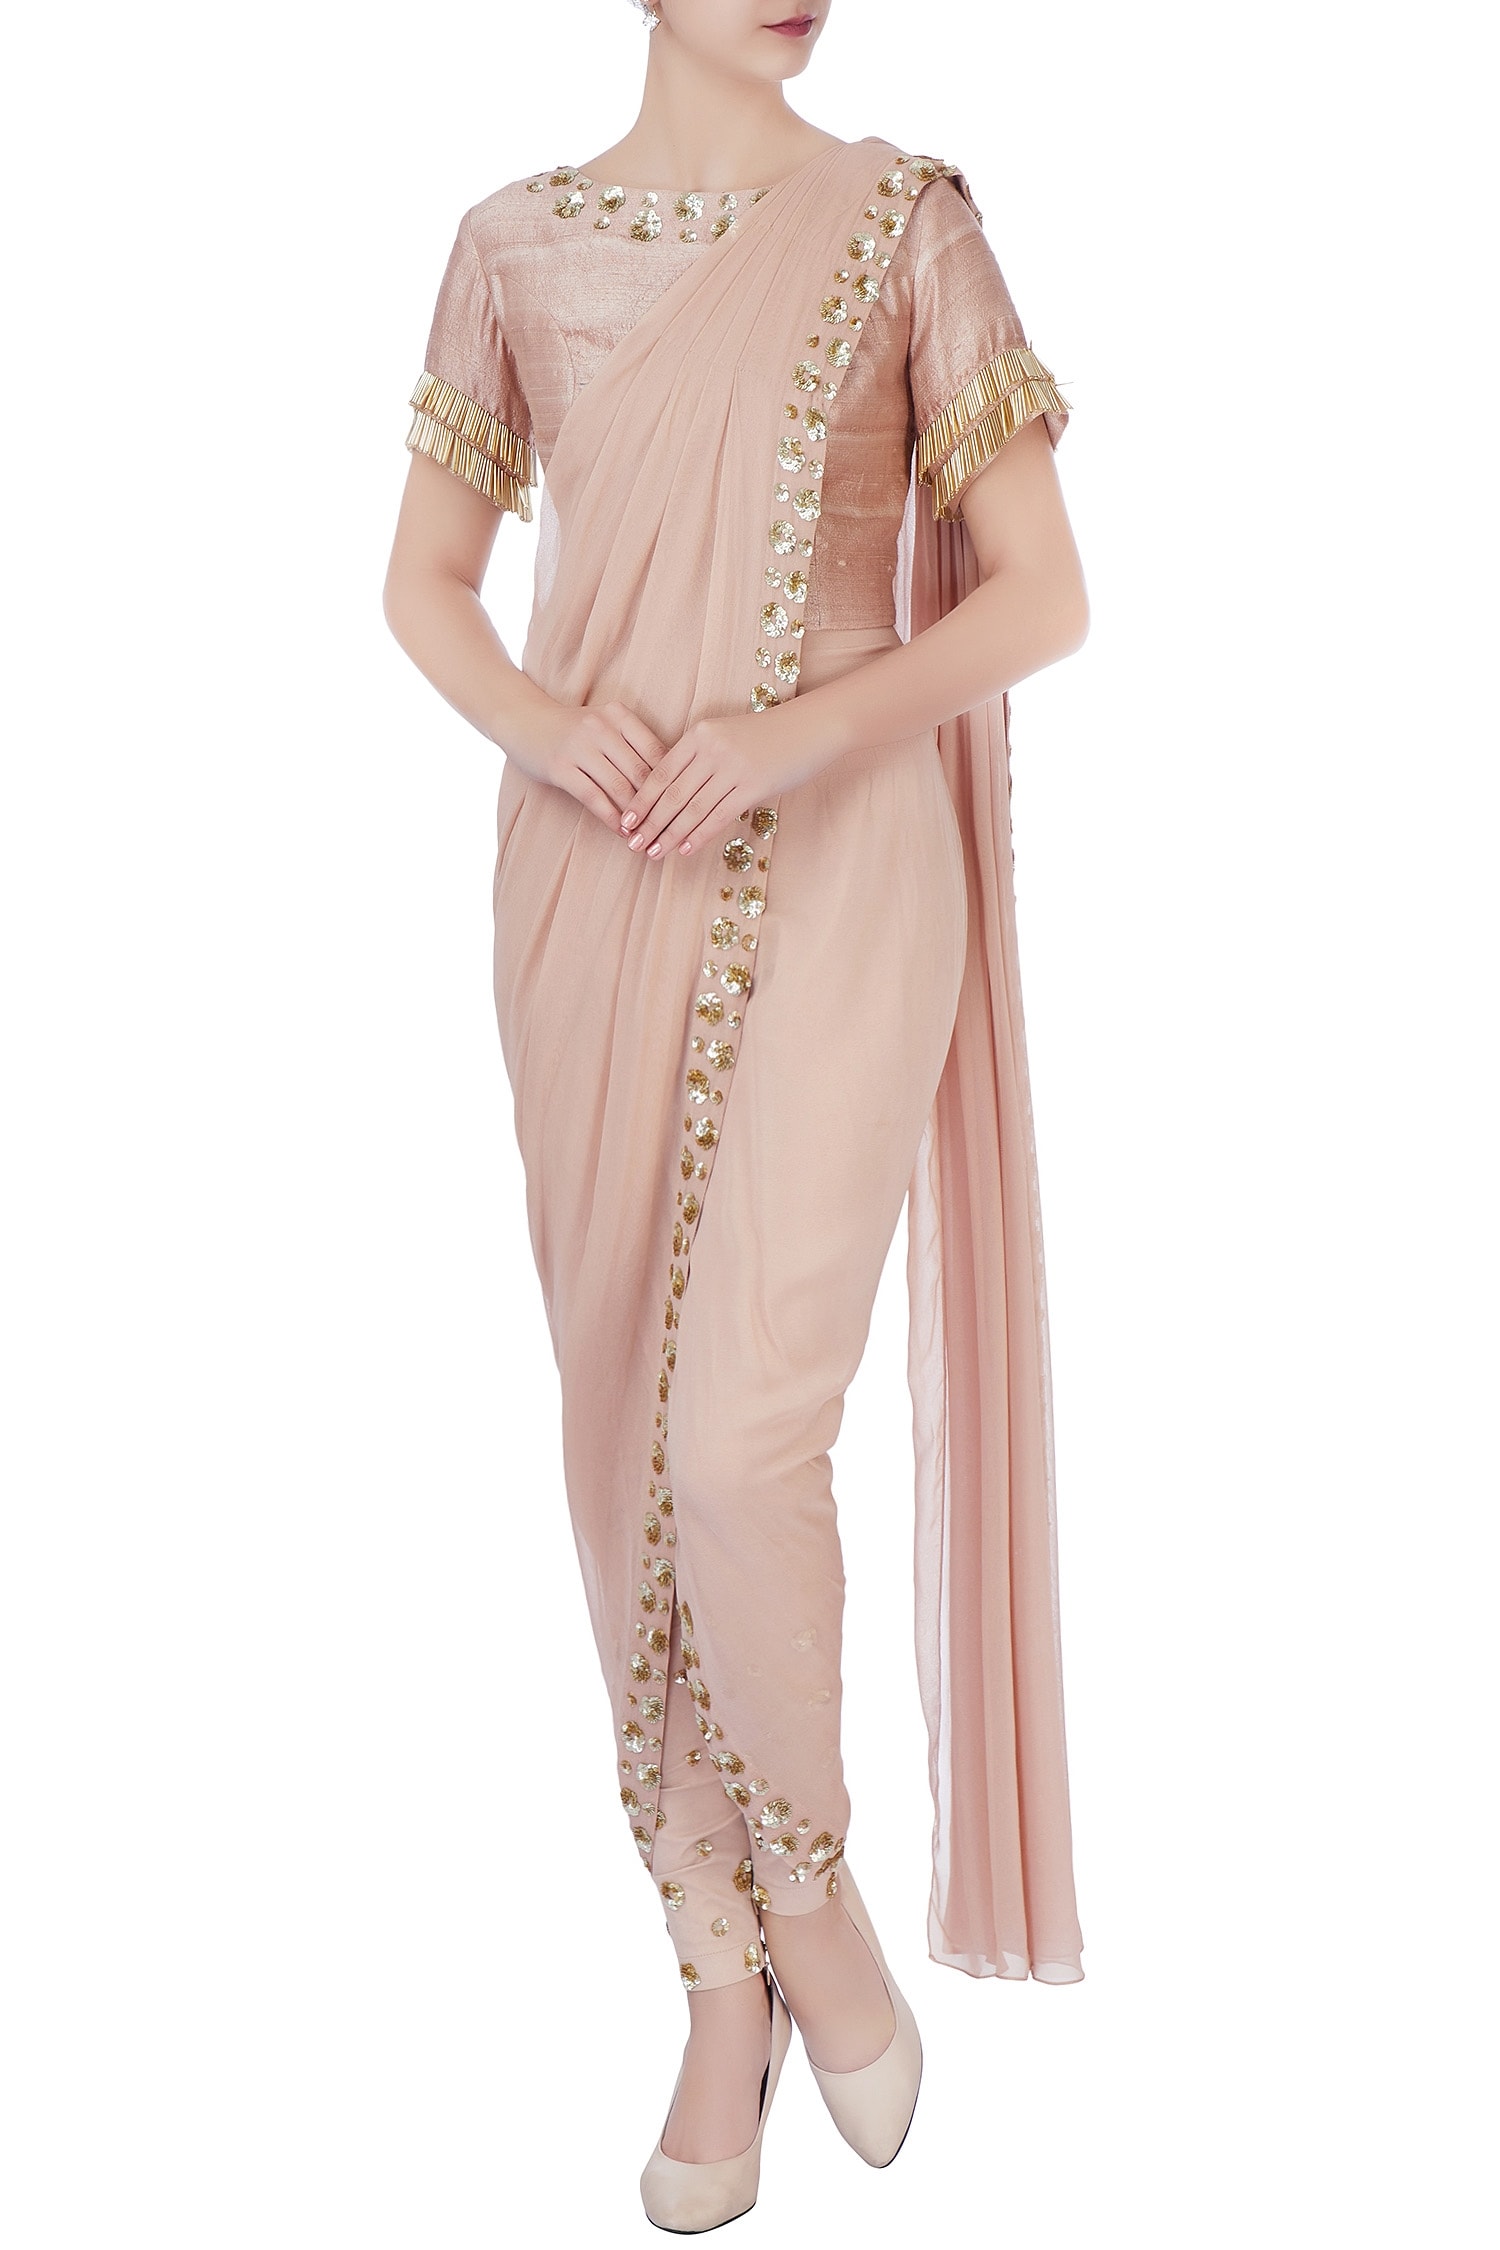 Chhavvi Aggarwal Beige Draped Saree With Pants And Blouse